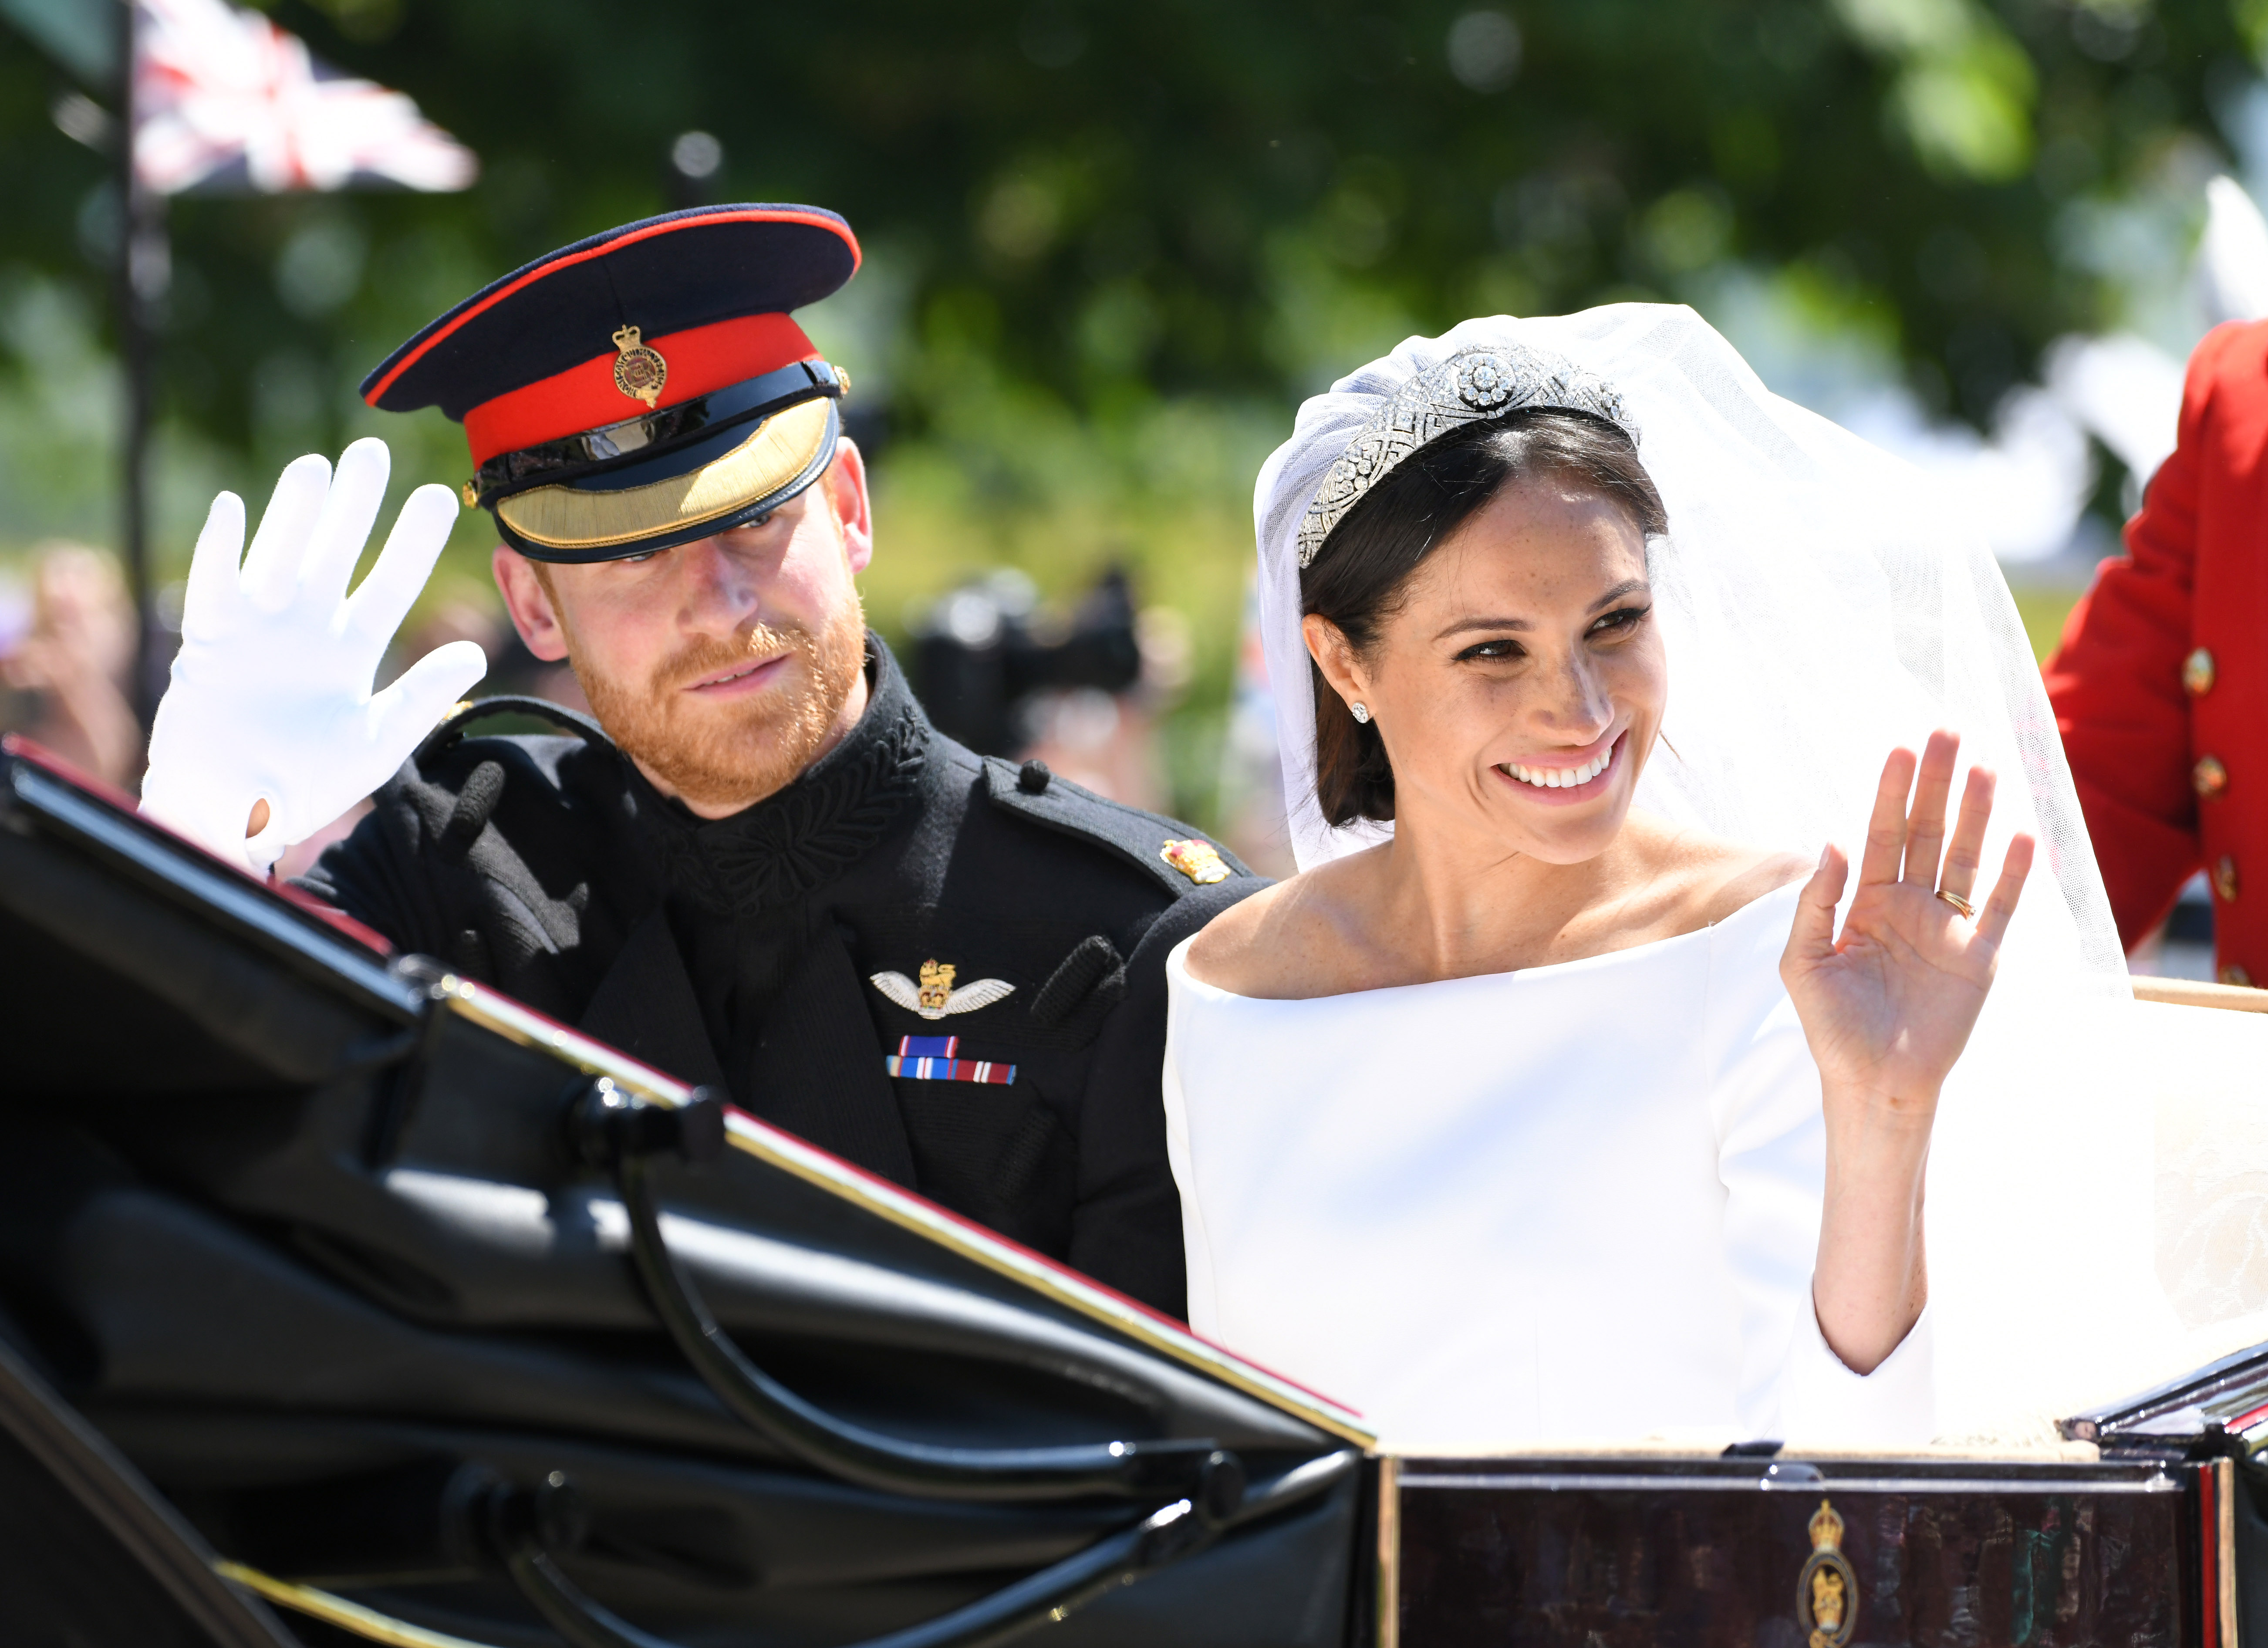 Prince Harry and Meghan Markle on their wedding day in Windsor, England on May 19, 2018 | Source: Getty Images